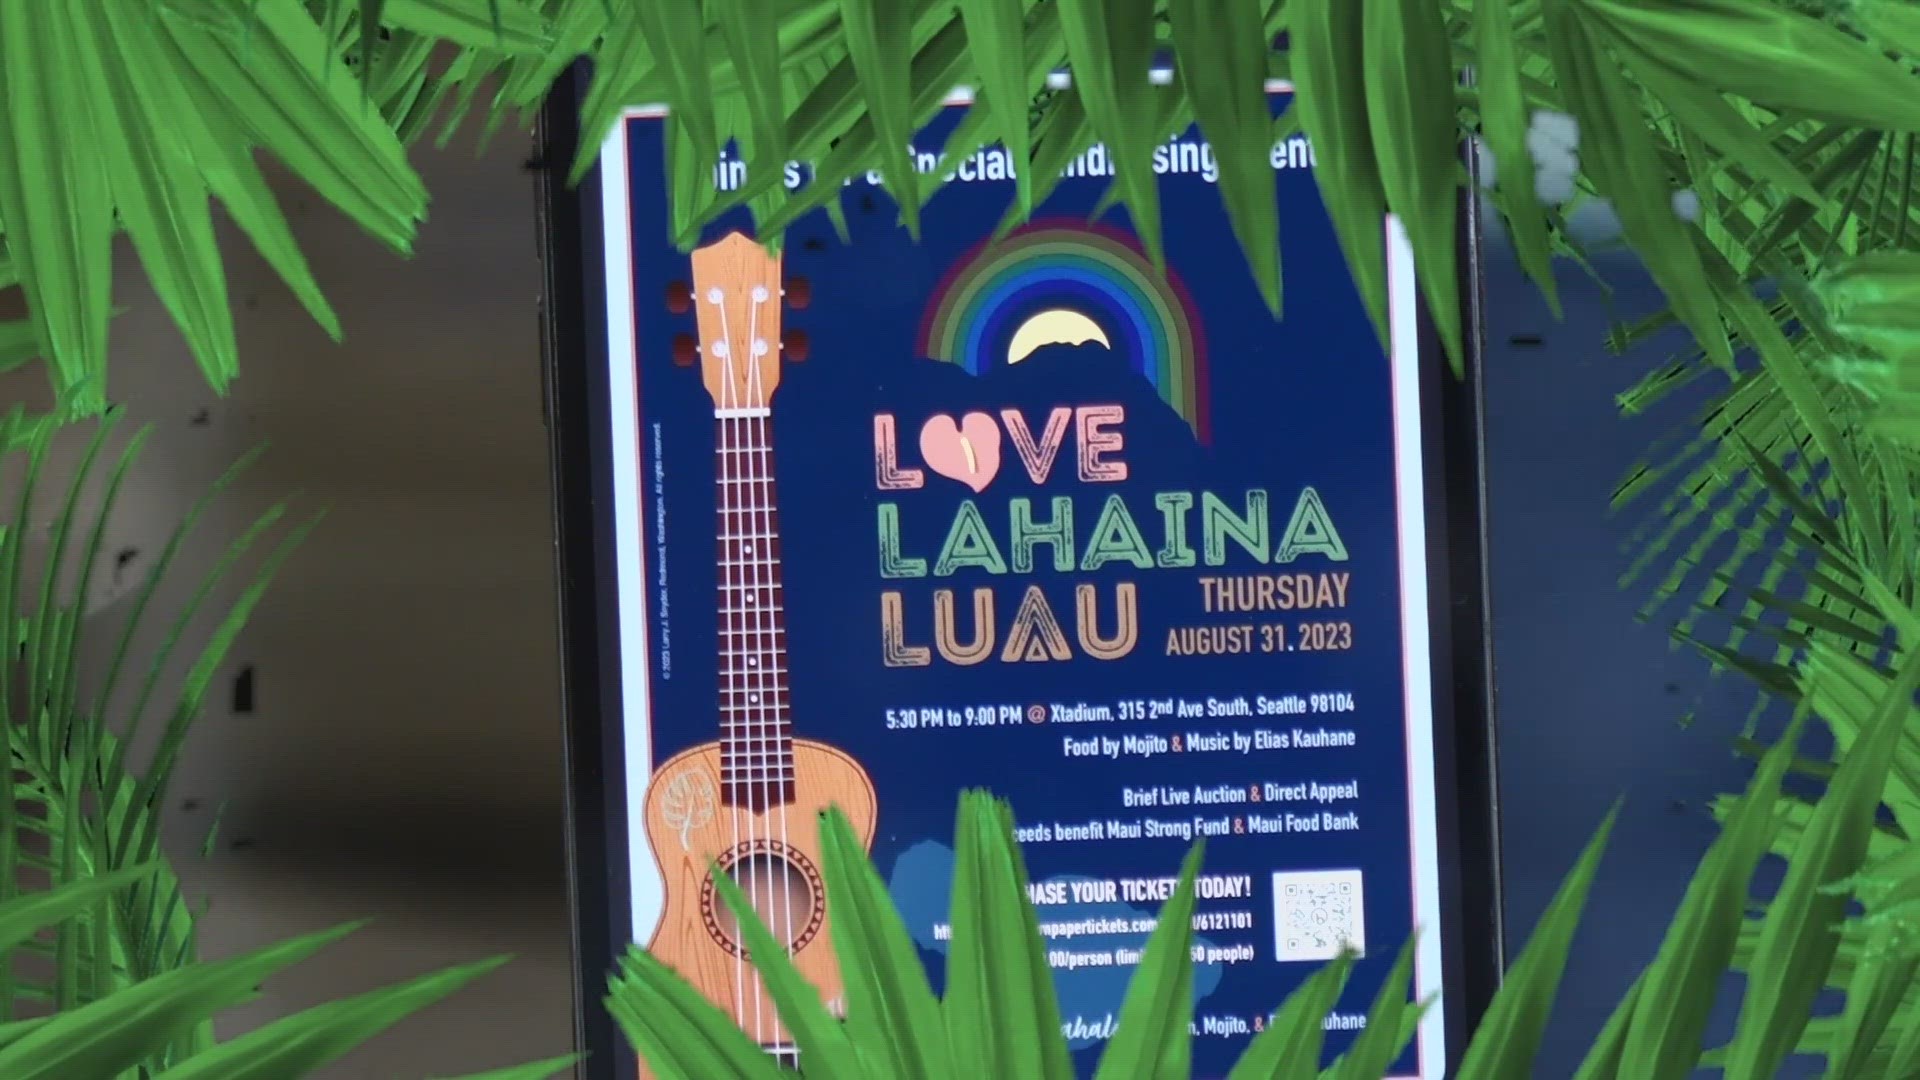 Love Lahaina Luau is offers food, music and comedy at Xtadium in Seattle until 9 p.m. Thursday, Aug. 31.